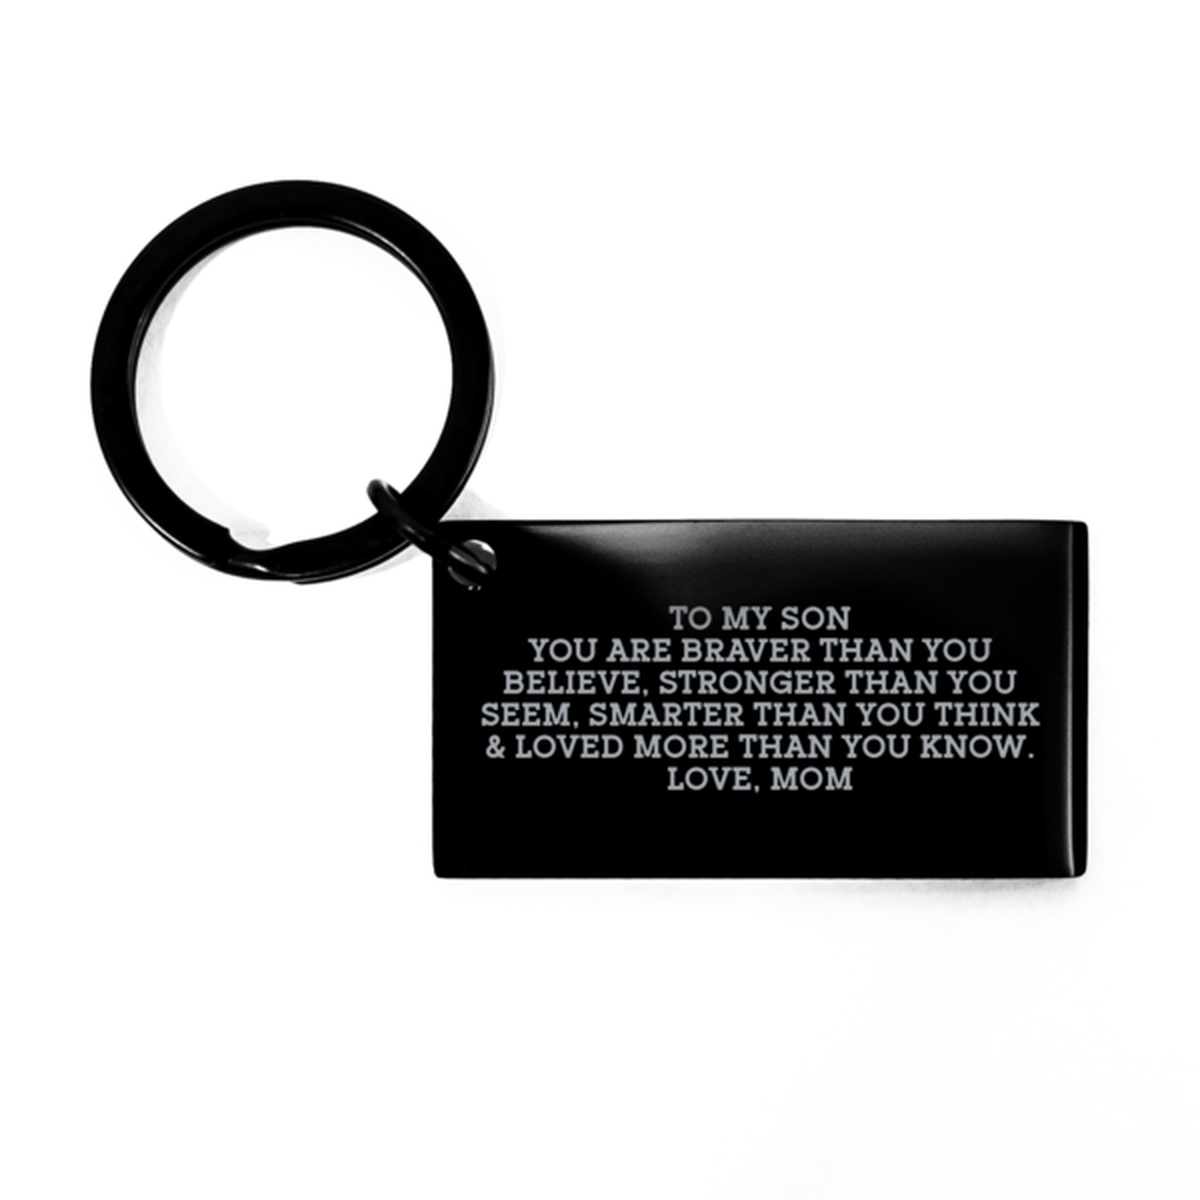 To My Son Black Keychain, You Are Braver Than You Believe, Graduation Day Gifts For Son From Mom, Birthday Gifts For Men